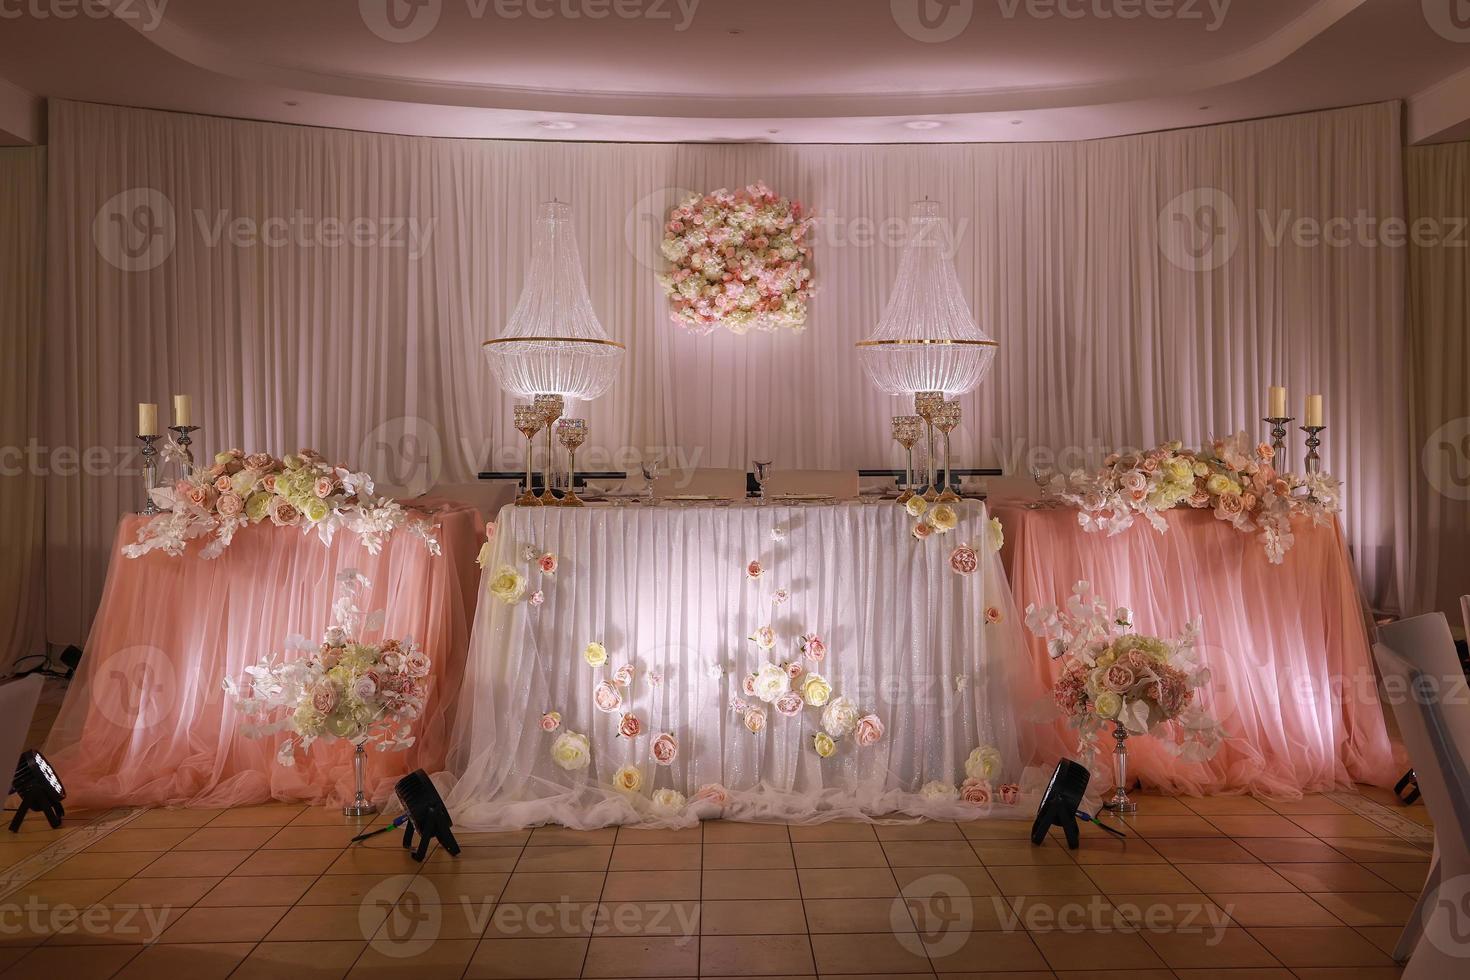 festive wedding table decoration with crystal chandeliers, golden candlesticks, candles and white pink flowers . stylish wedding day photo